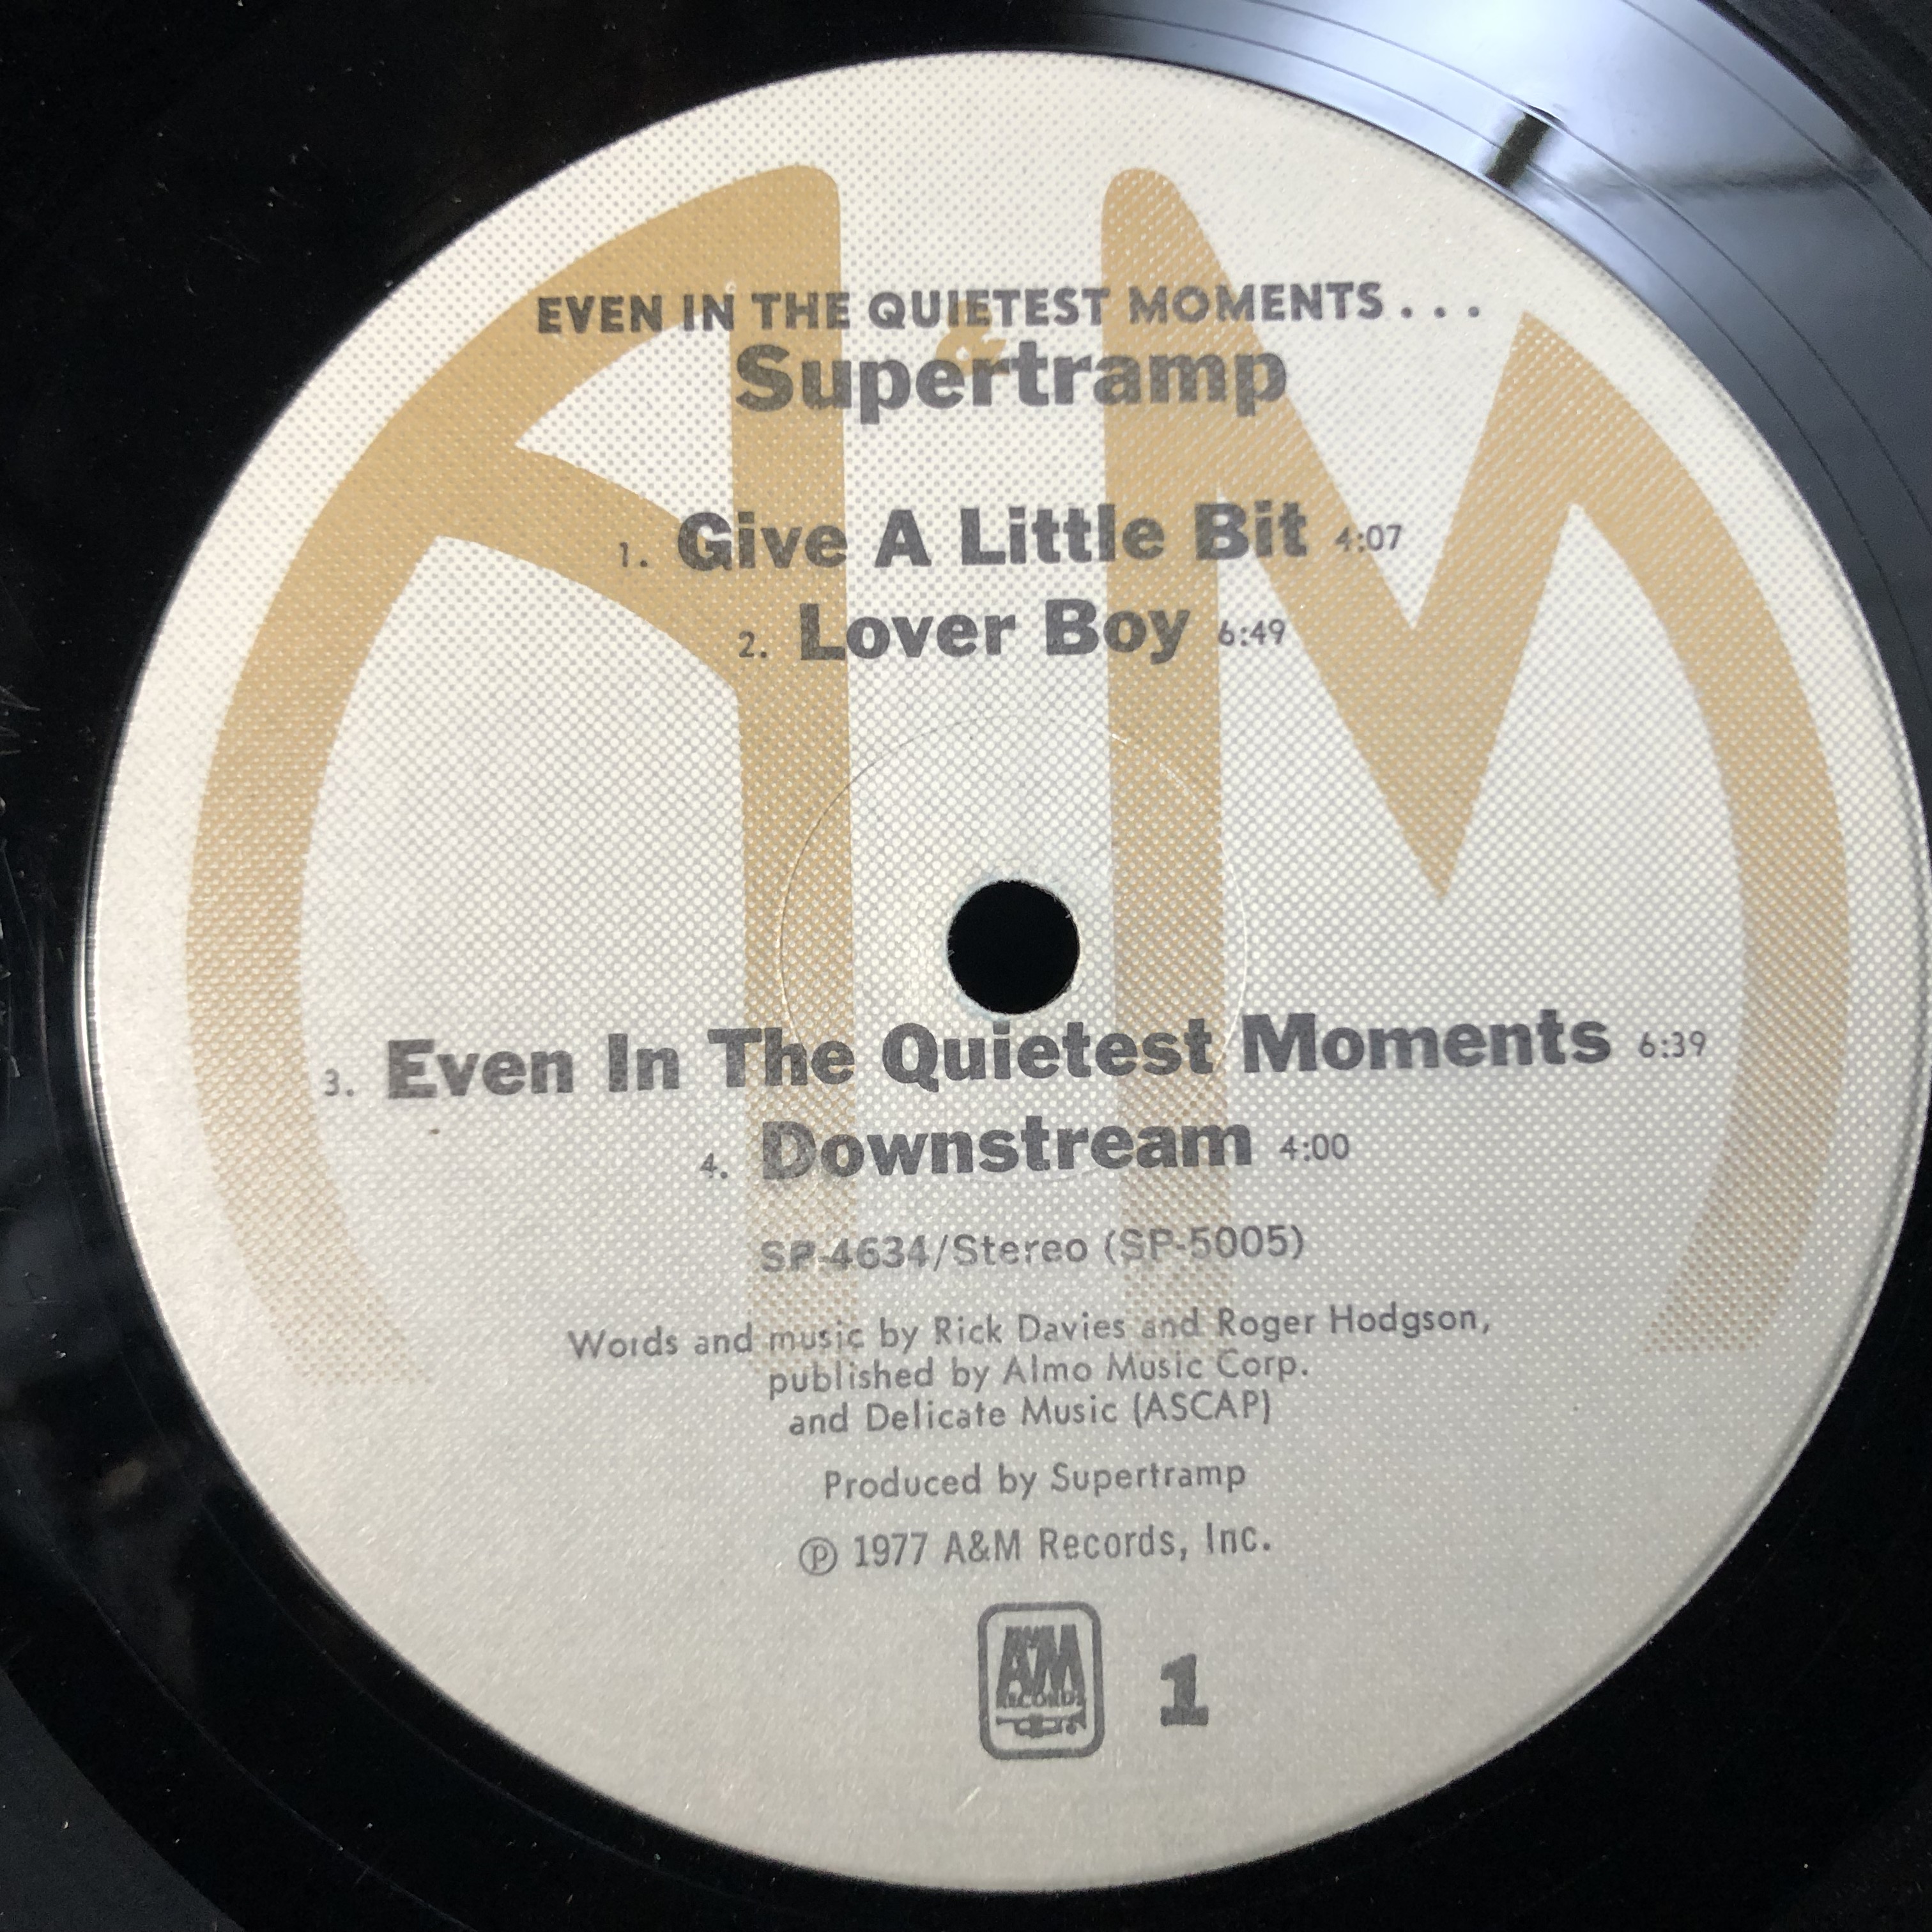 Supertramp ‎– Even In The Quietest Moments... (1a Ed USA)